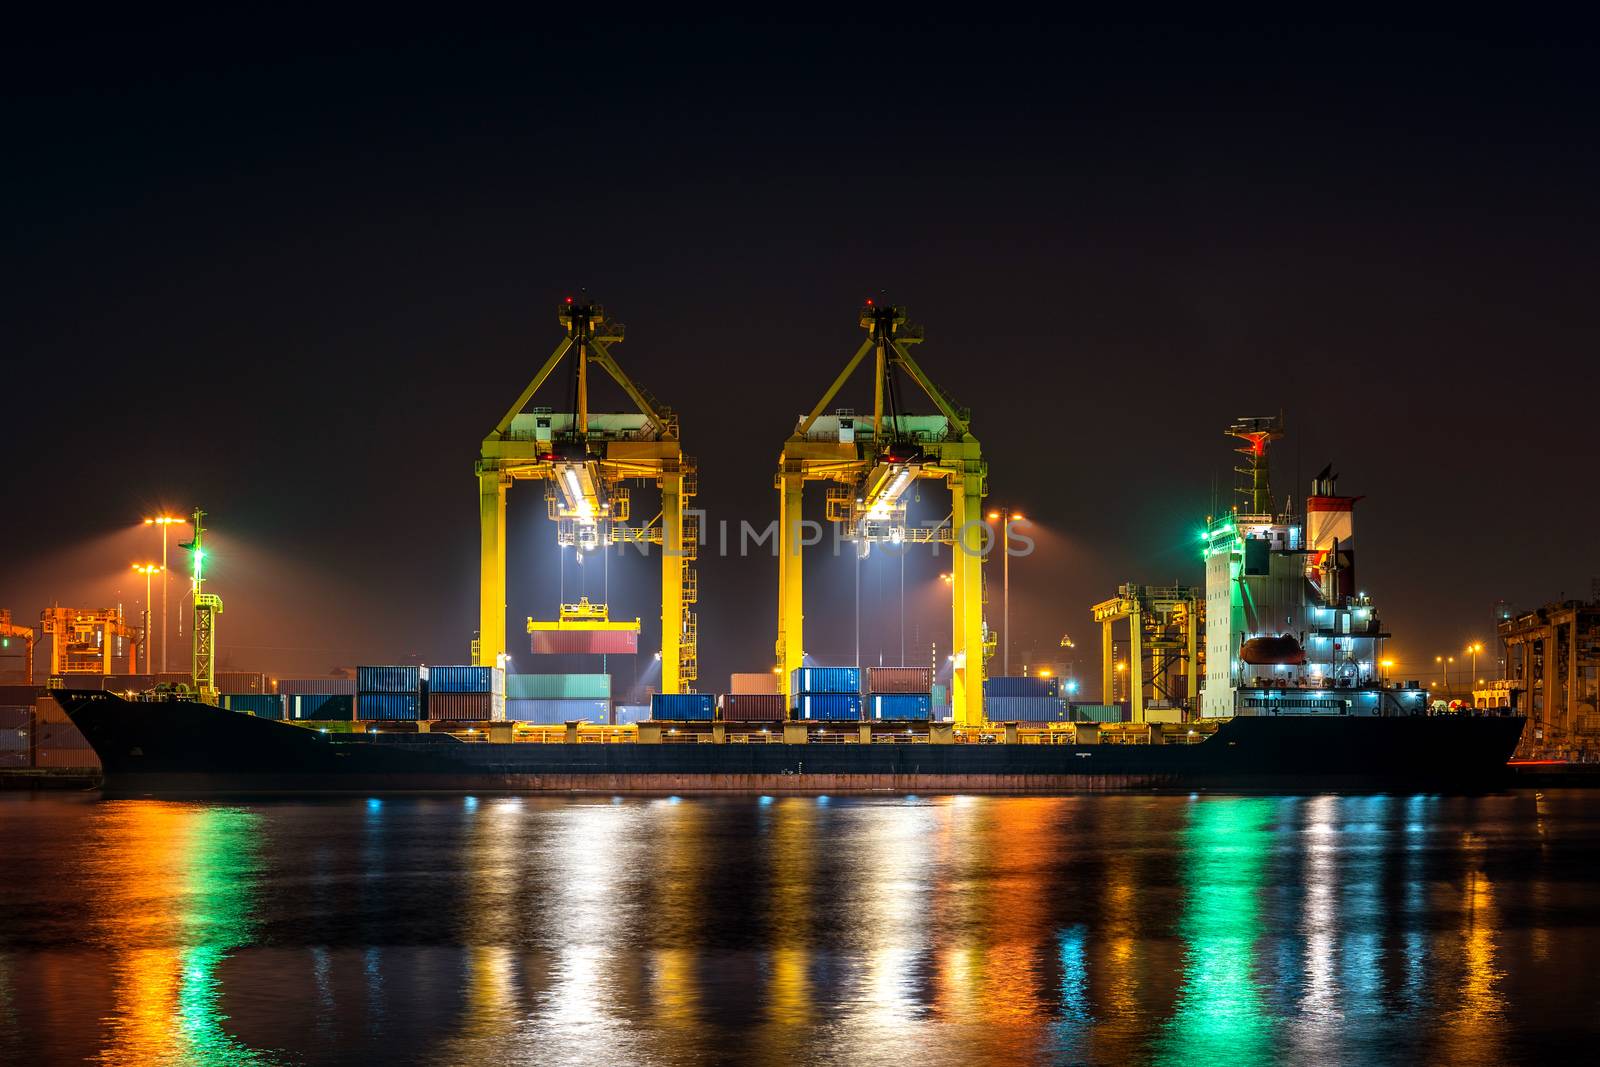 Industrial port with containers, Shipping cargo to harbor. by gutarphotoghaphy